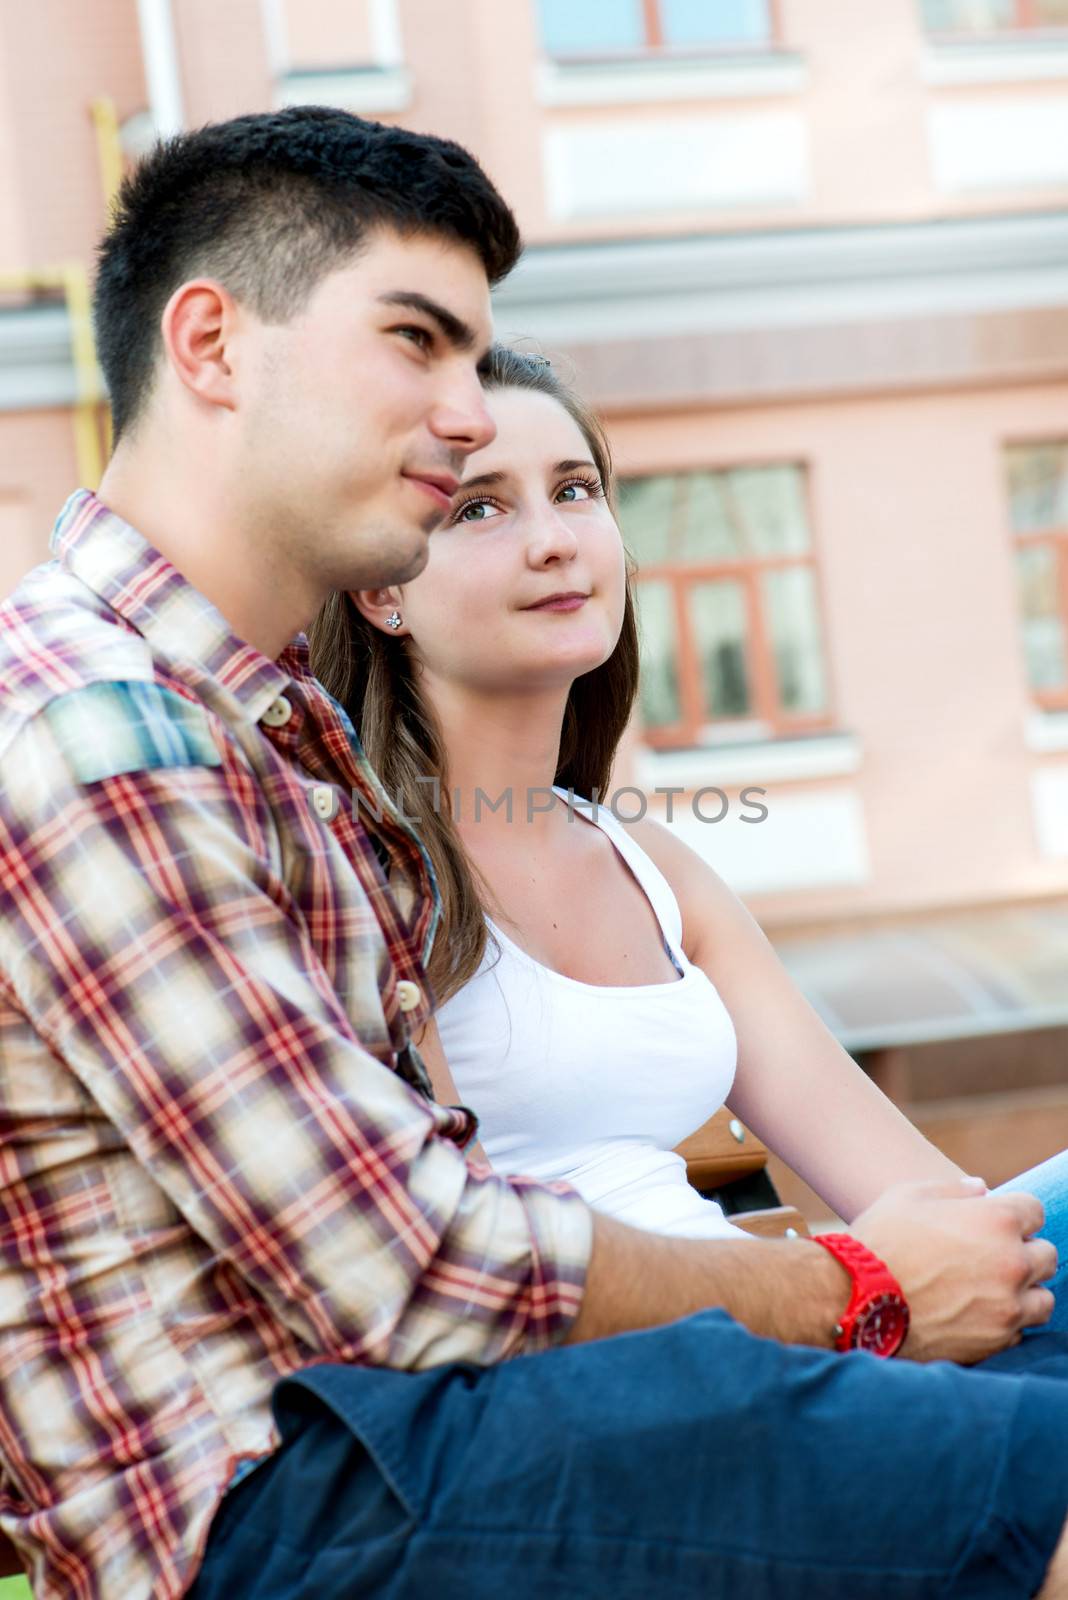 Young couple sitting on bench on street by Nanisimova